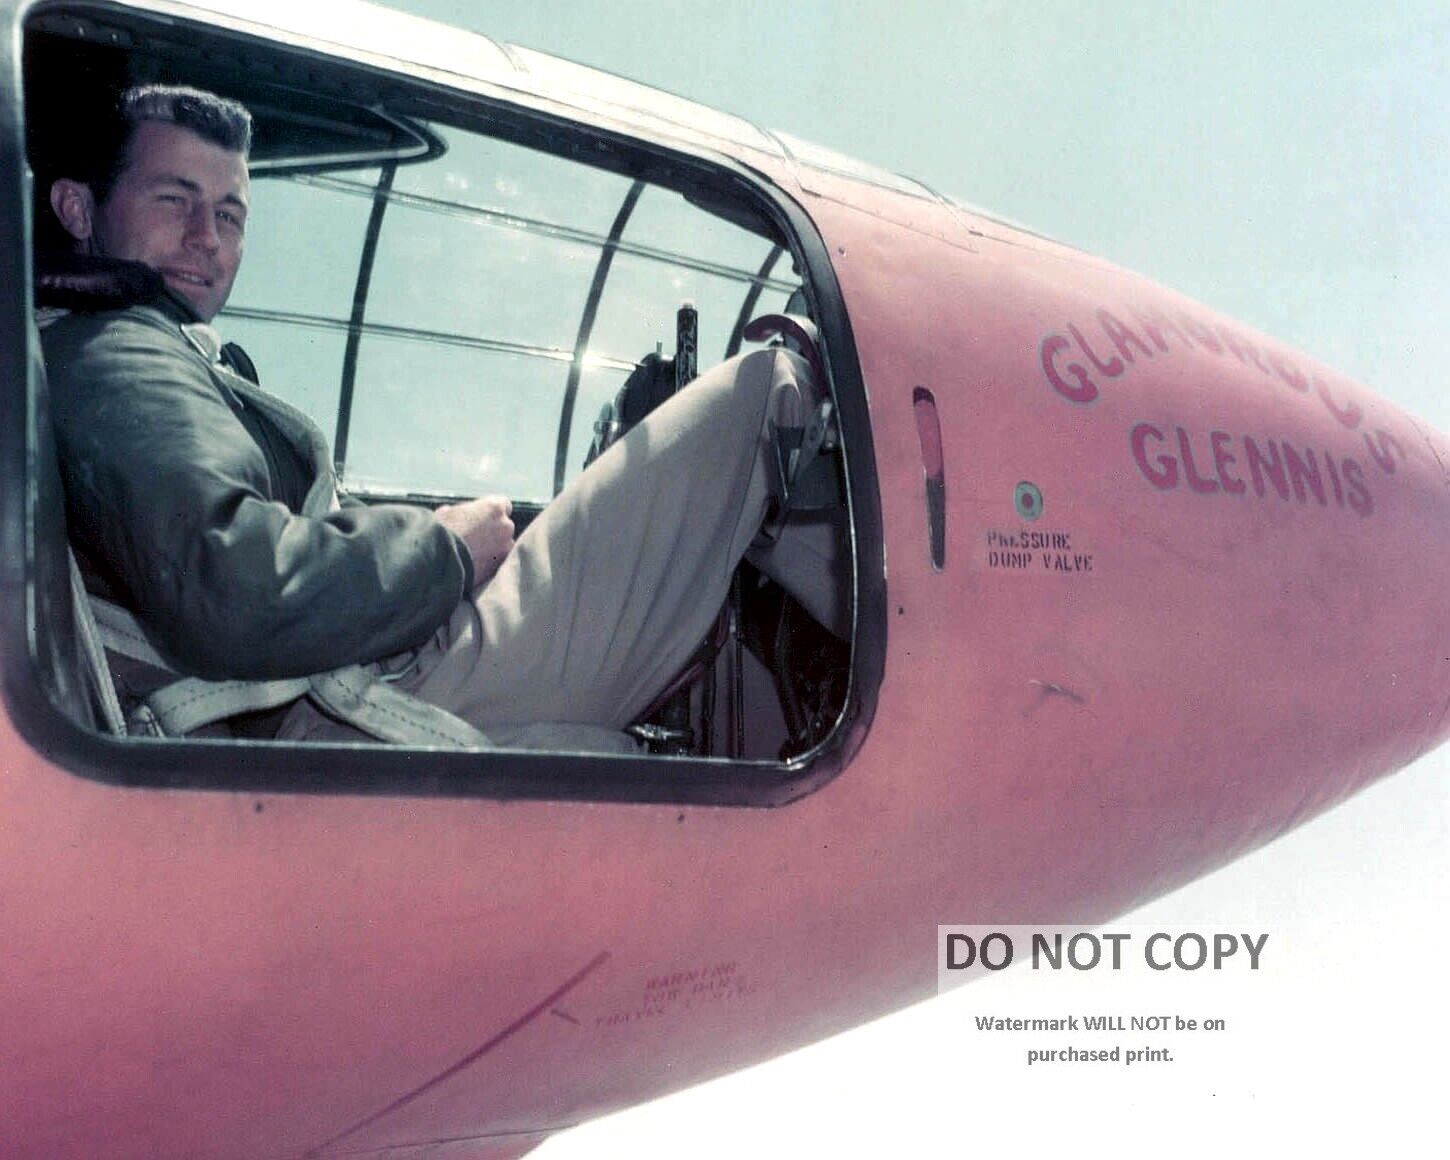 CAPTAIN CHUCK YEAGER IN BELL X-1 COCKPIT GLAMOROUS GLENNIS - 8X10 PHOTO (AA-258)